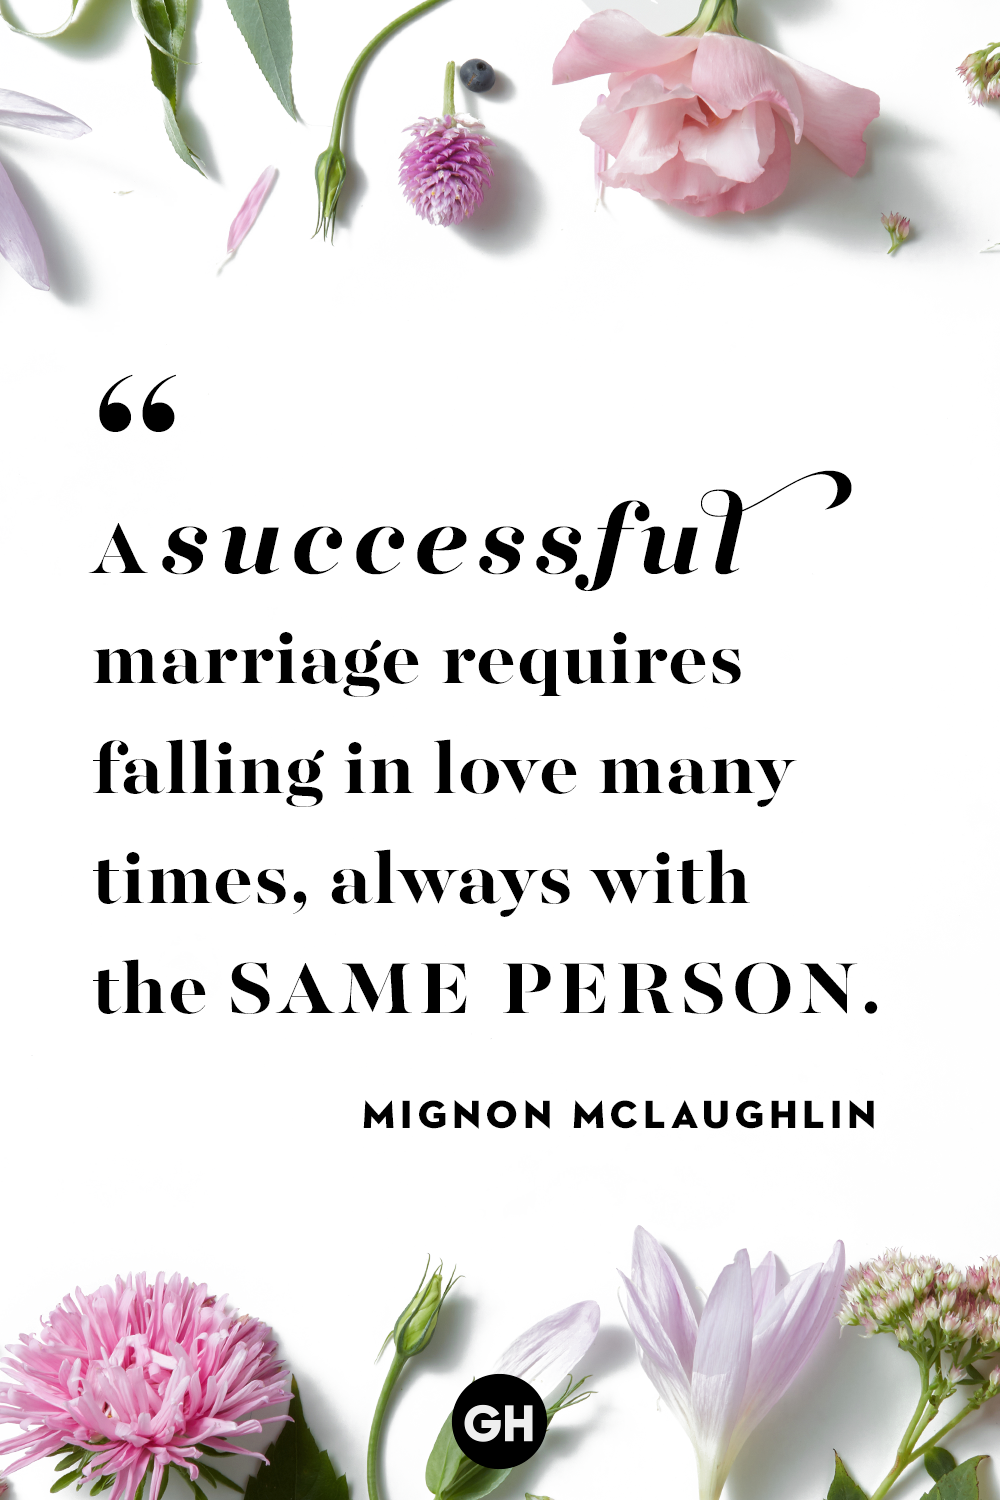 Funny, Happy Marriage Quotes   Inspirational Words About Marriage